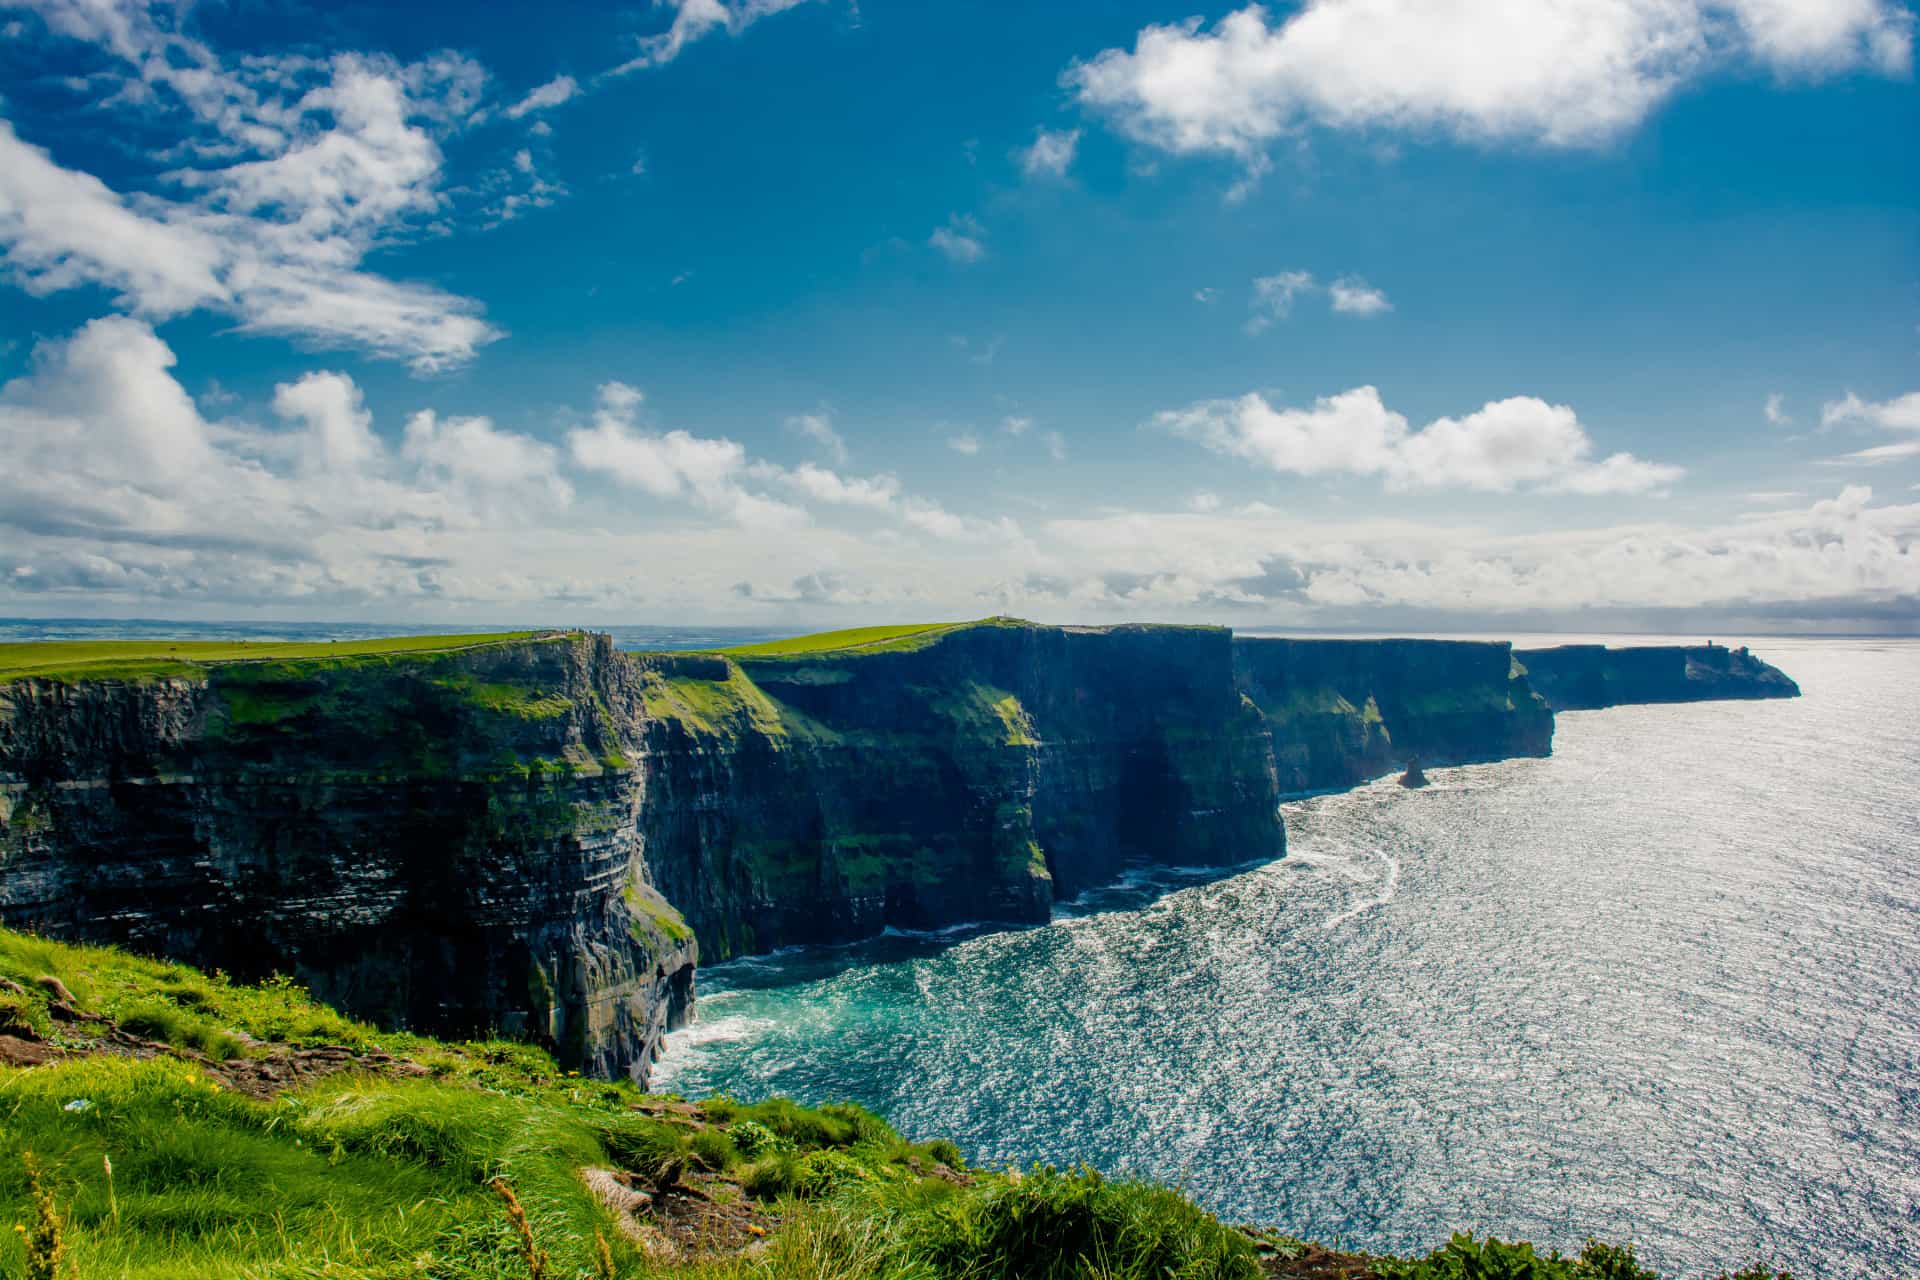 Why you should go: Northern Ireland offers both modern, cosmopolitan Belfast and the picturesque countryside. Don't forget to visit Giant’s Causeway, an area of about 40,000 interlocking basalt columns that resulted from an ancient volcanic fissure eruption.